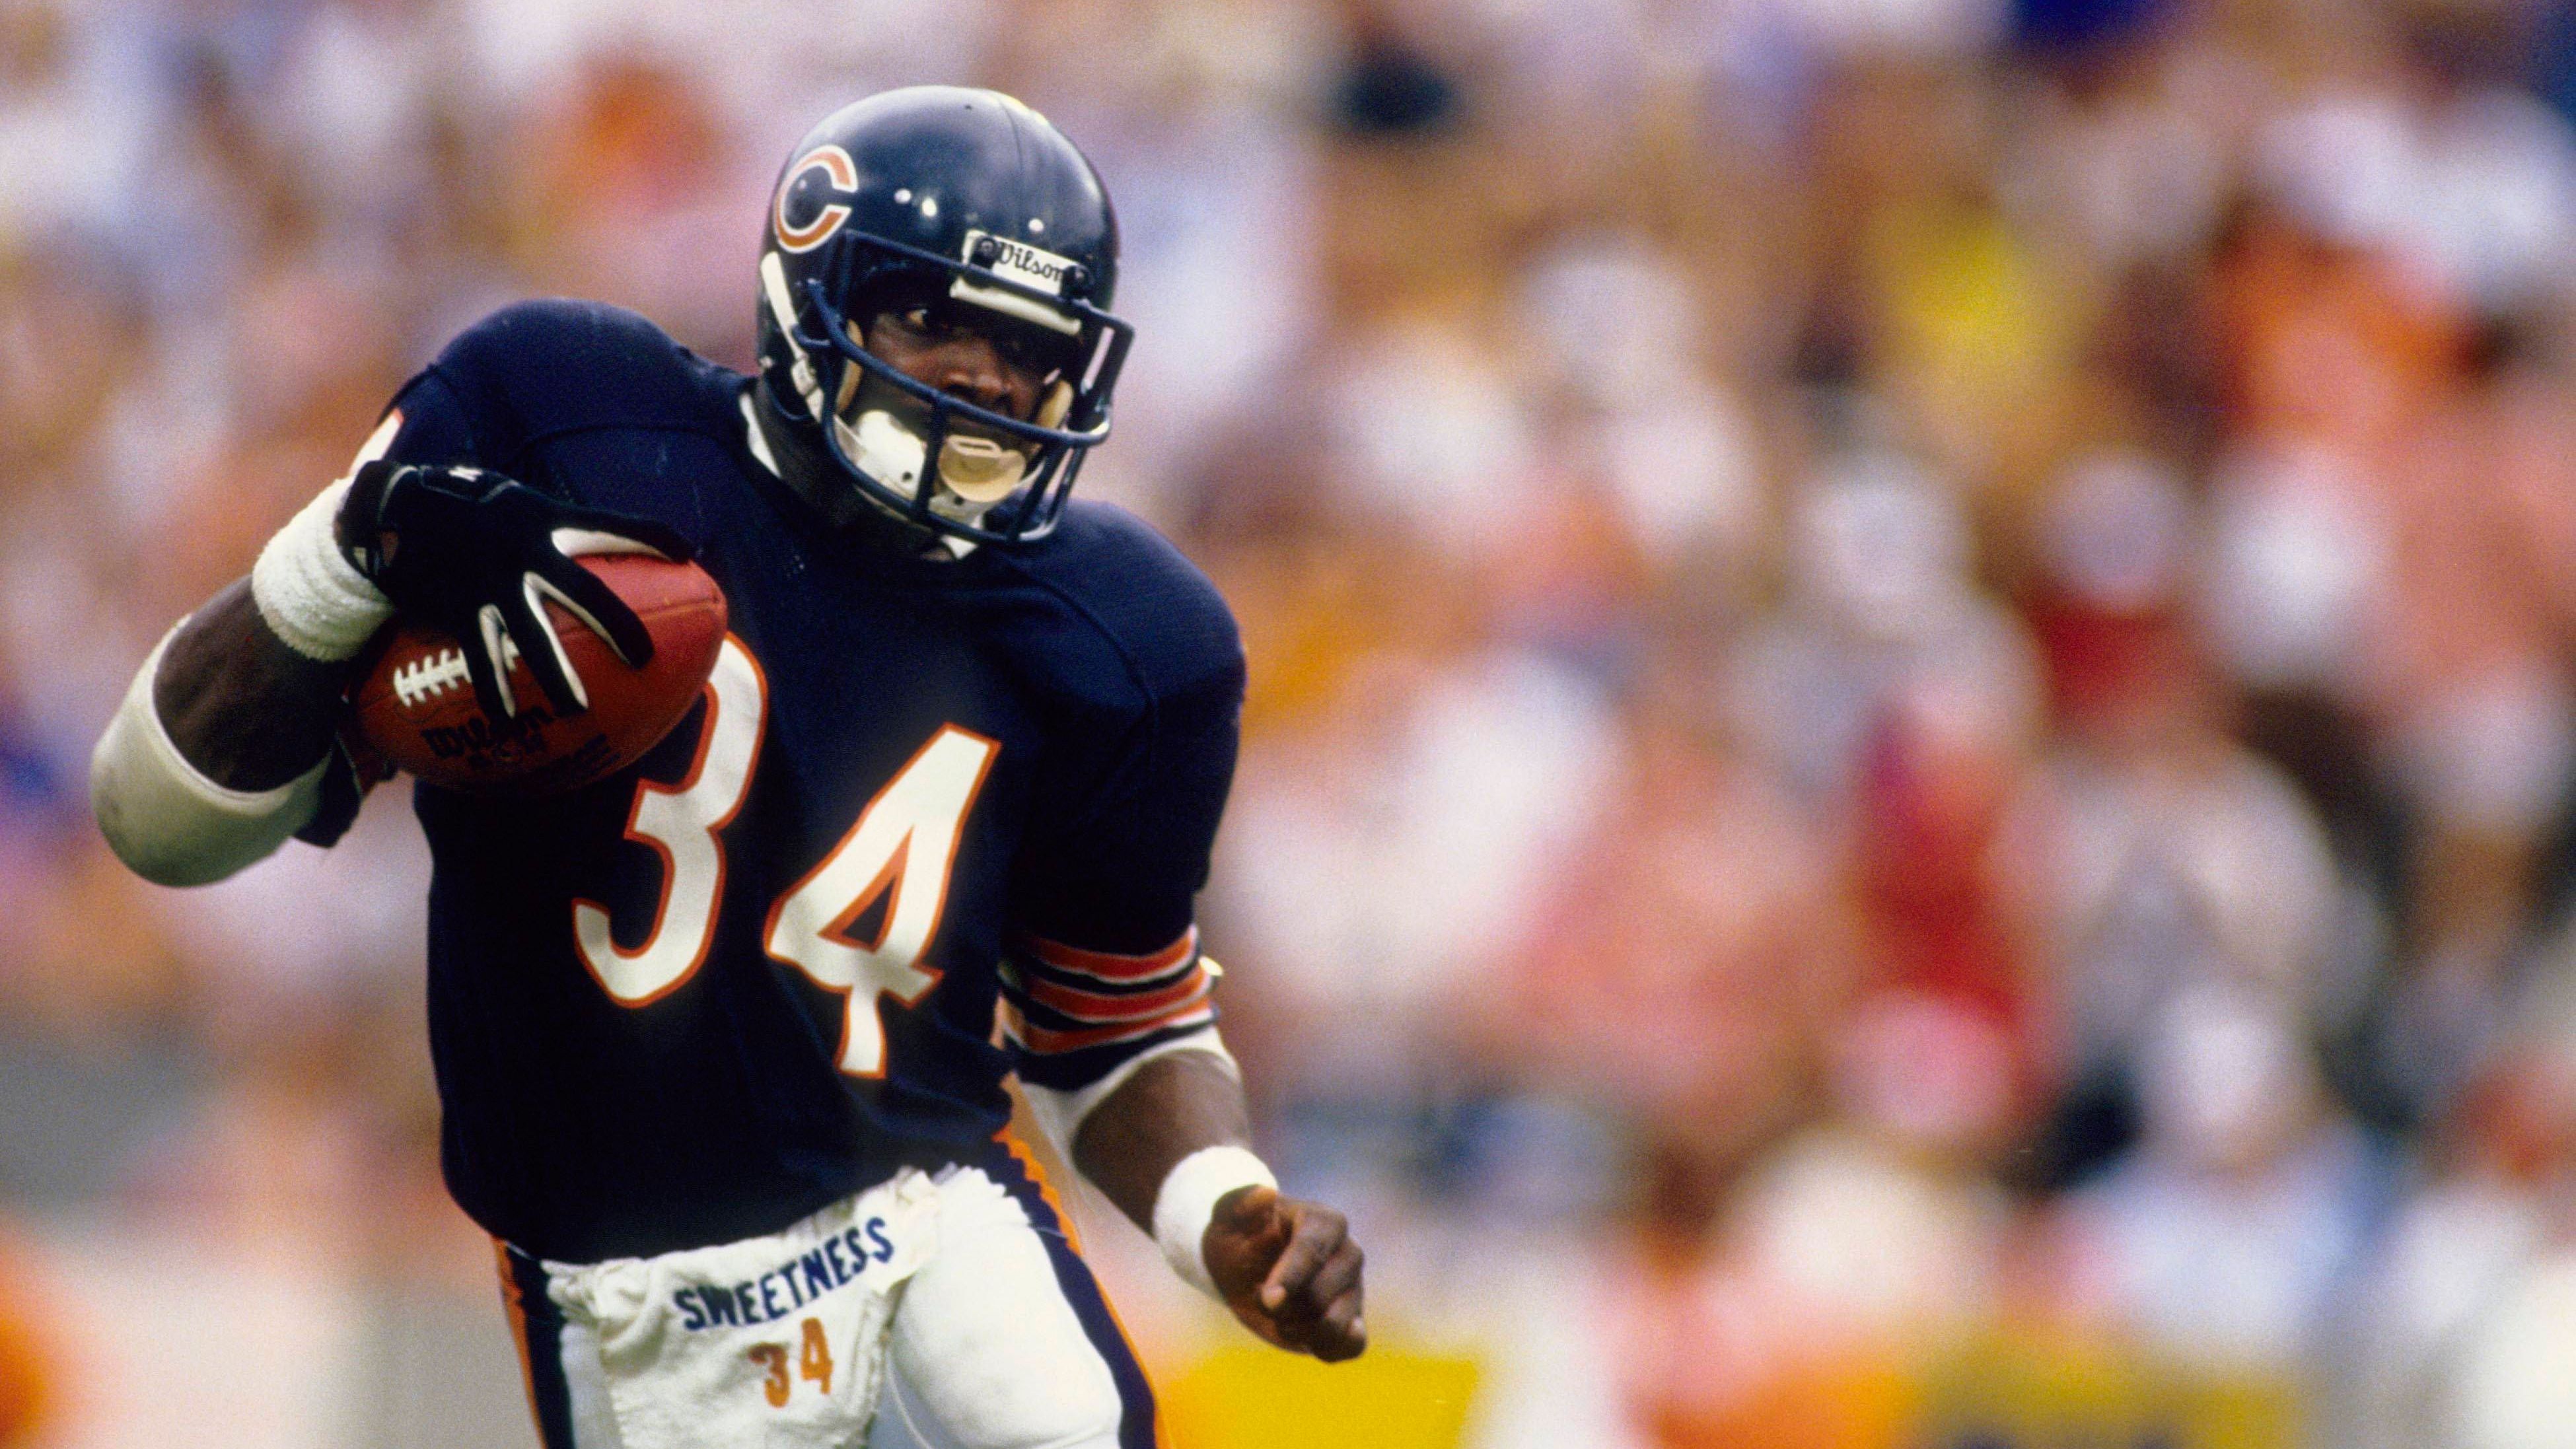 <strong>34: Walter Payton</strong><br>Team: Chicago Bears<br>Position: Running Back<br>Erfolge: Pro Football Hall of Famer, Super-Bowl-Champion 1986, 1977 NFL MVP<br>Honorable Mentions: Earl Campbell, Thurman Thomas, Rickey Williams